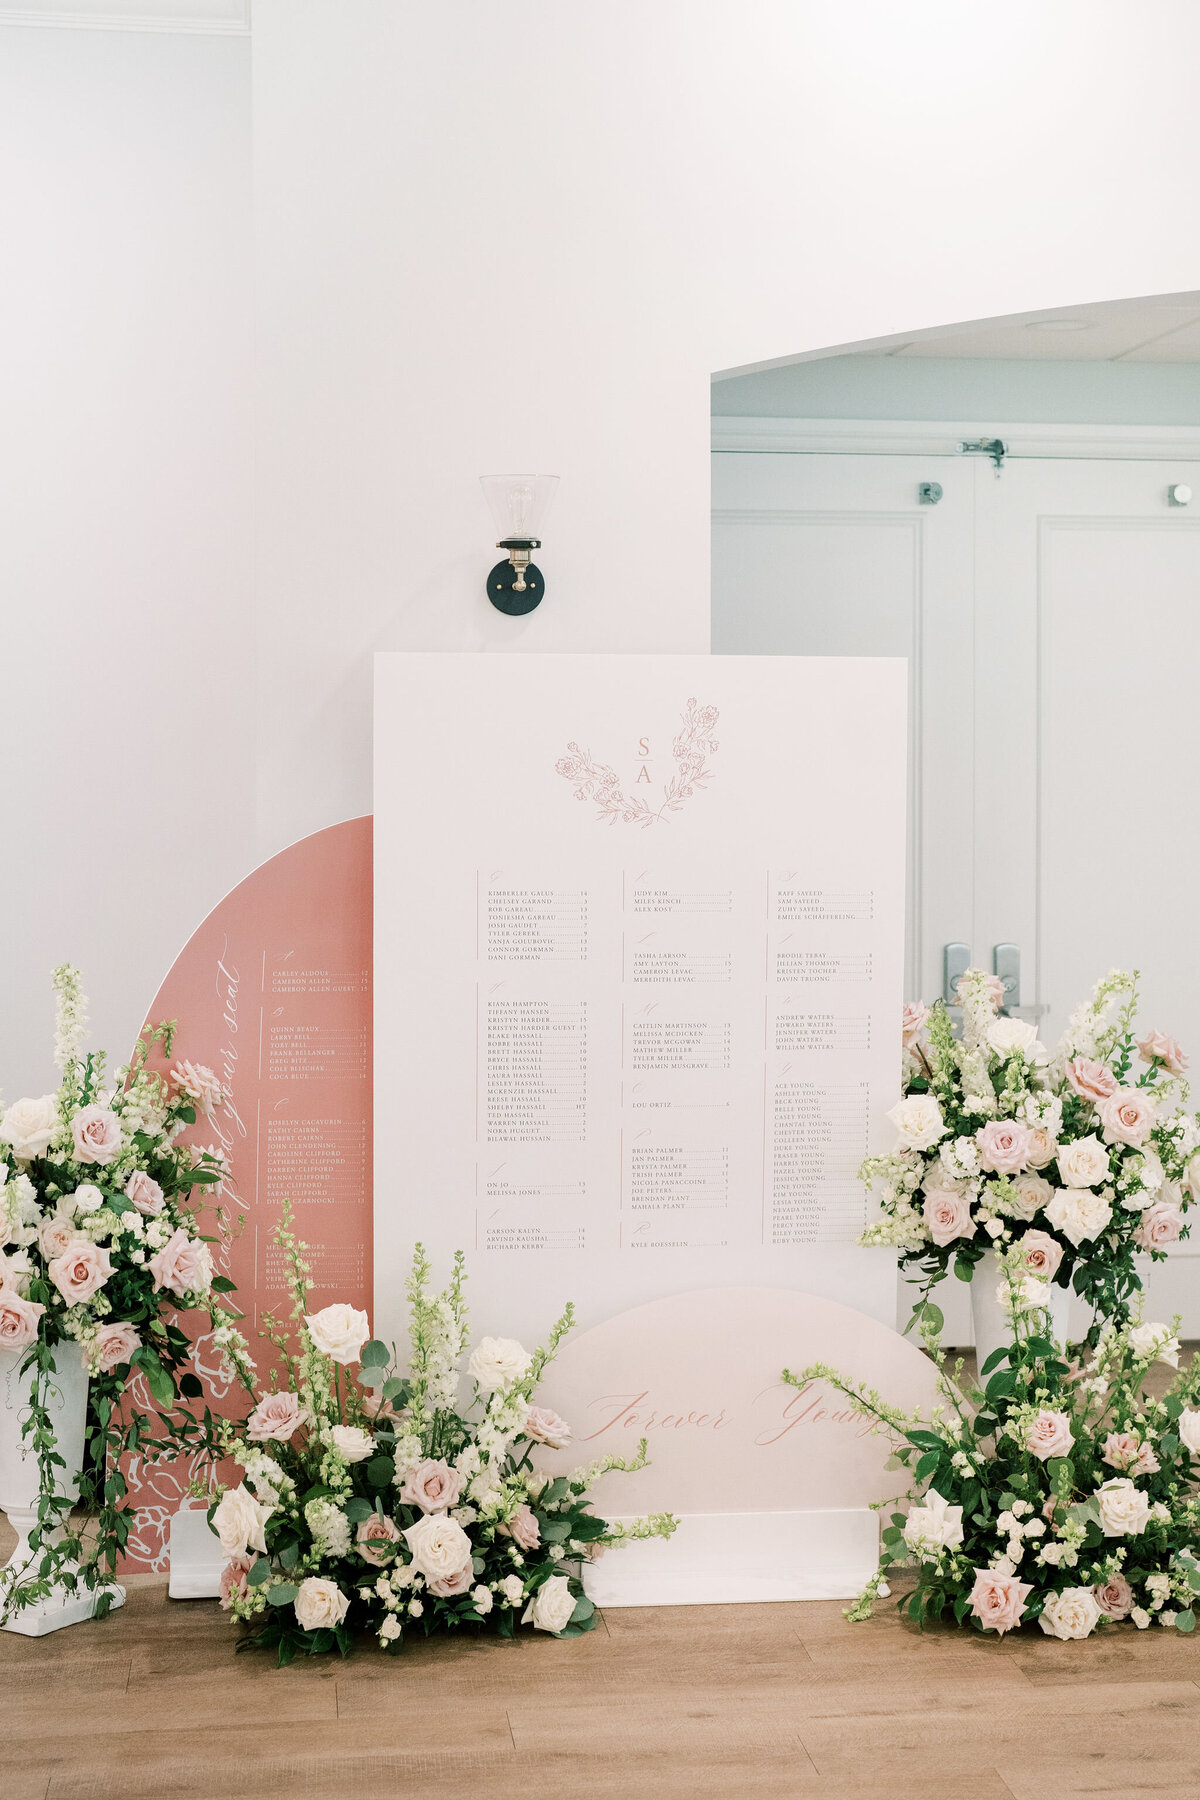 An elegant wedding seating chart with floral arrangements featuring white and pink flowers stands against a white wall in a bright room, meticulously designed by our full service wedding planning team.